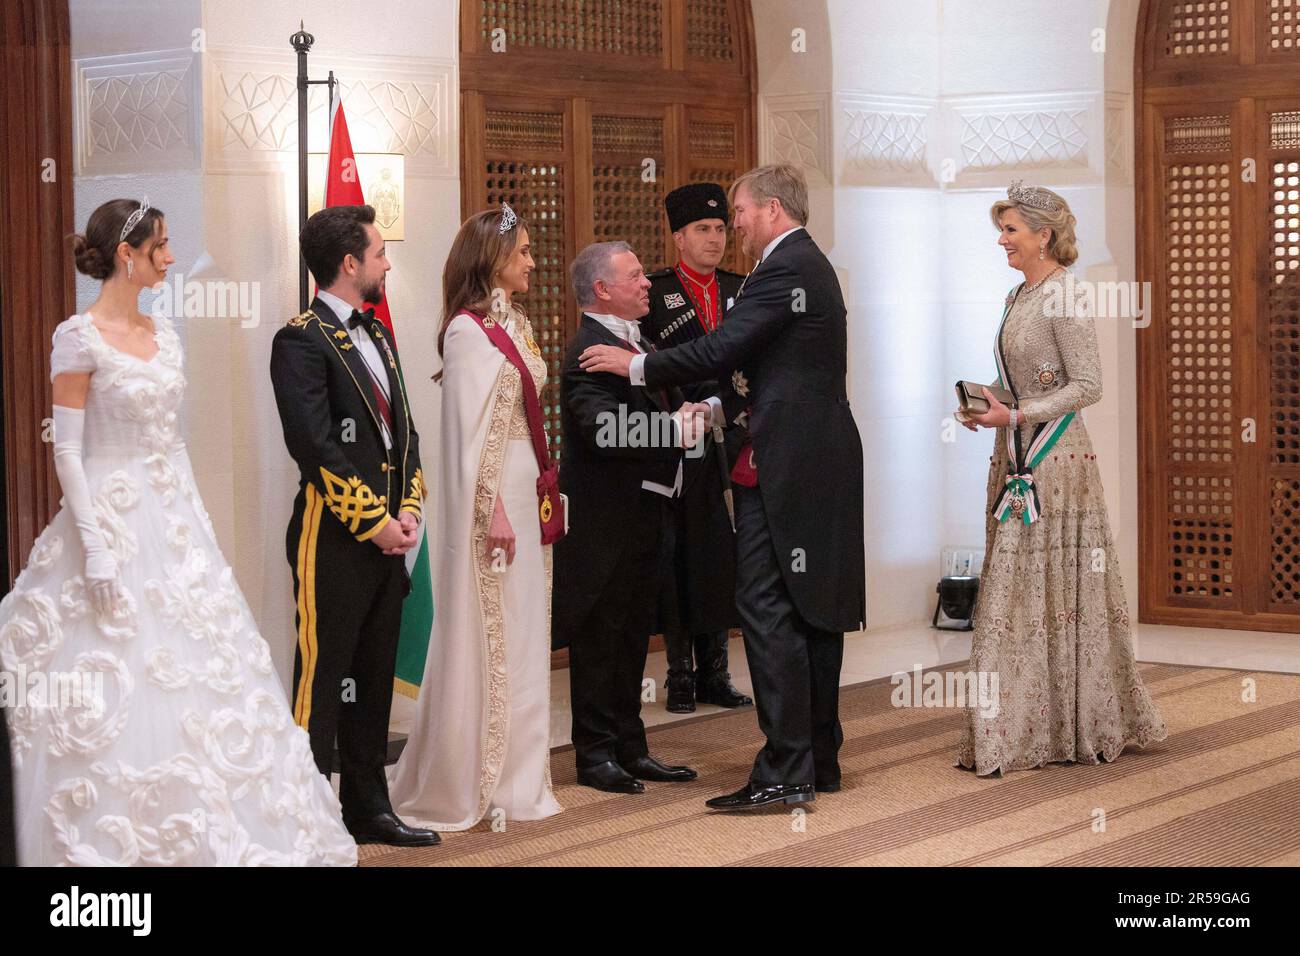 Amman, Jordan. 01st June, 2023. King Willem-Alexander of the Netherlands and Queen Maxima salute King Abdullah II of Jordan and Queen Rania, as they attend Jordan's Crown Prince Al Hussein bin Abdullah II's Royal Wedding Banquet at Al Husseinieh Palace in Amman, Jordan, on June 1st, 2023. Photo by Balkis Press/ABACAPRESS.COM Credit: Abaca Press/Alamy Live News Stock Photo